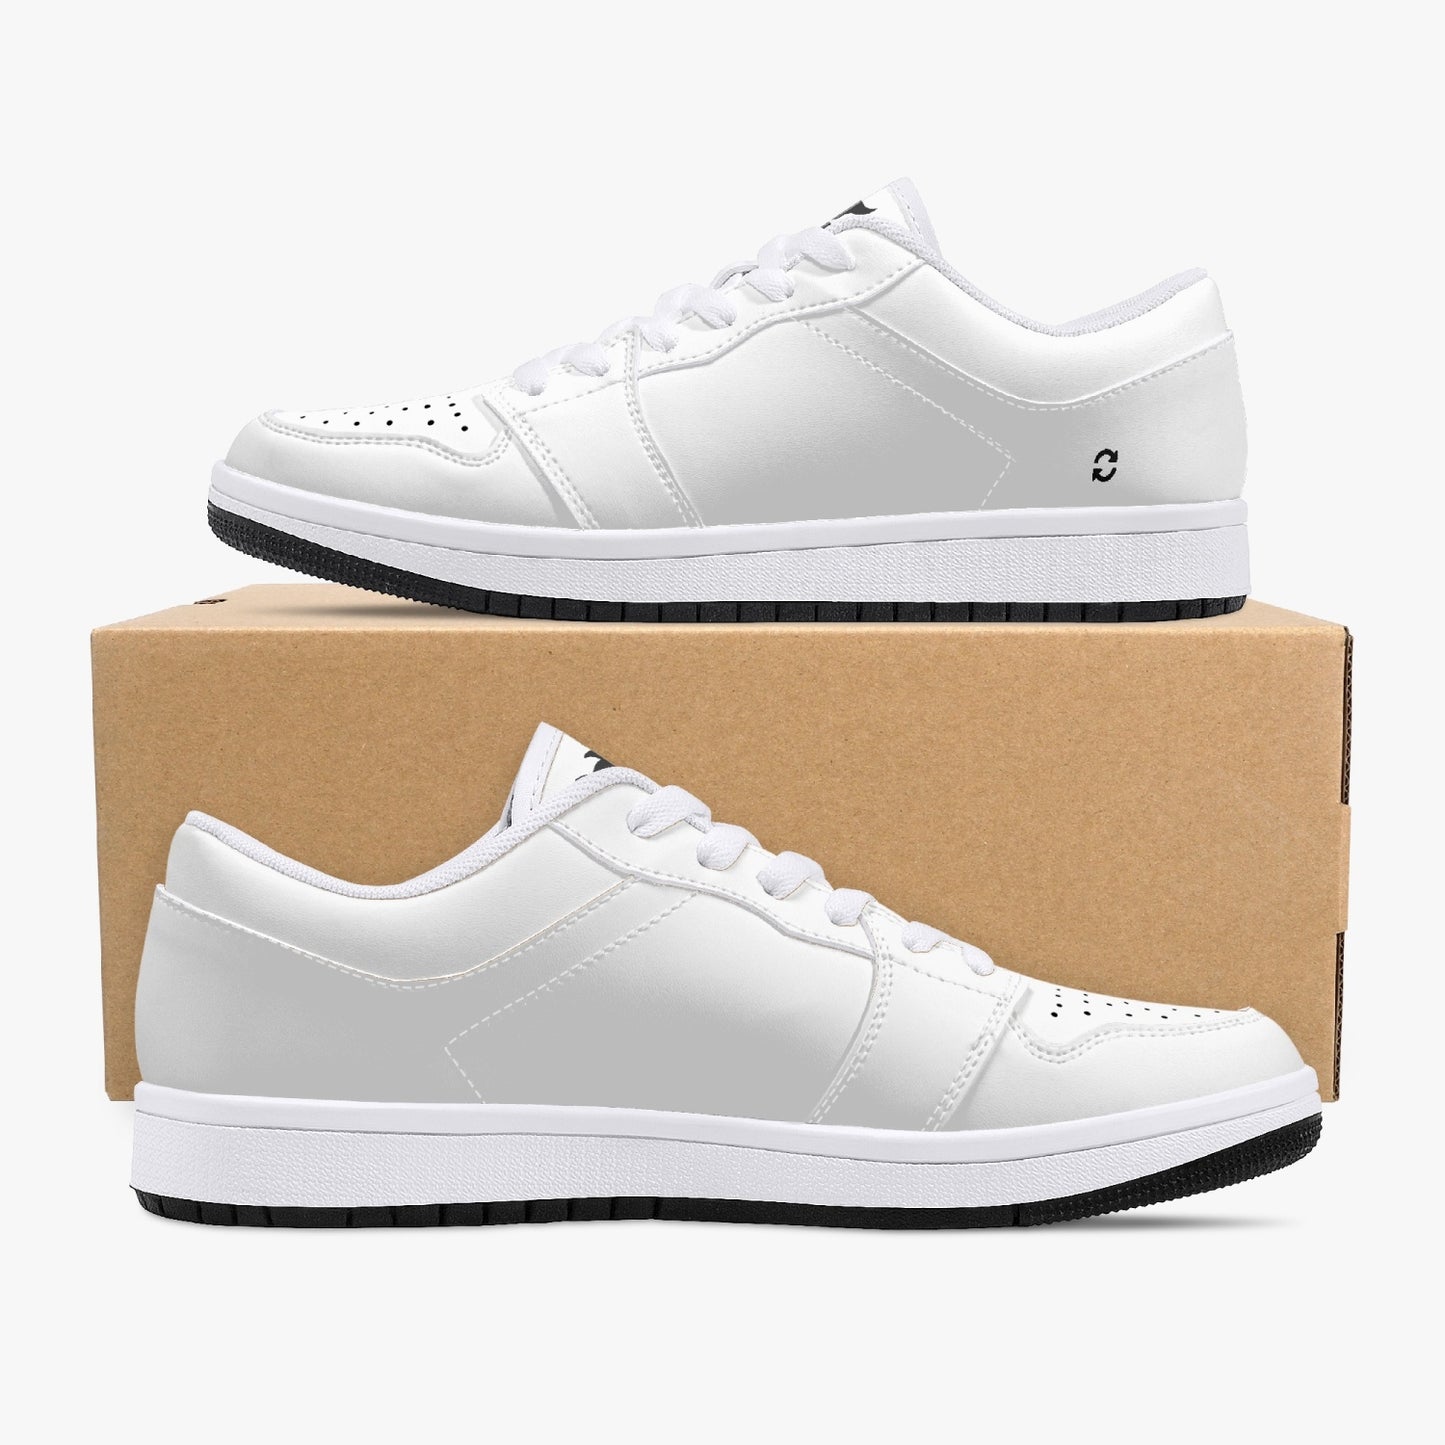 Unisex Top Leather Sneakers - White/Black